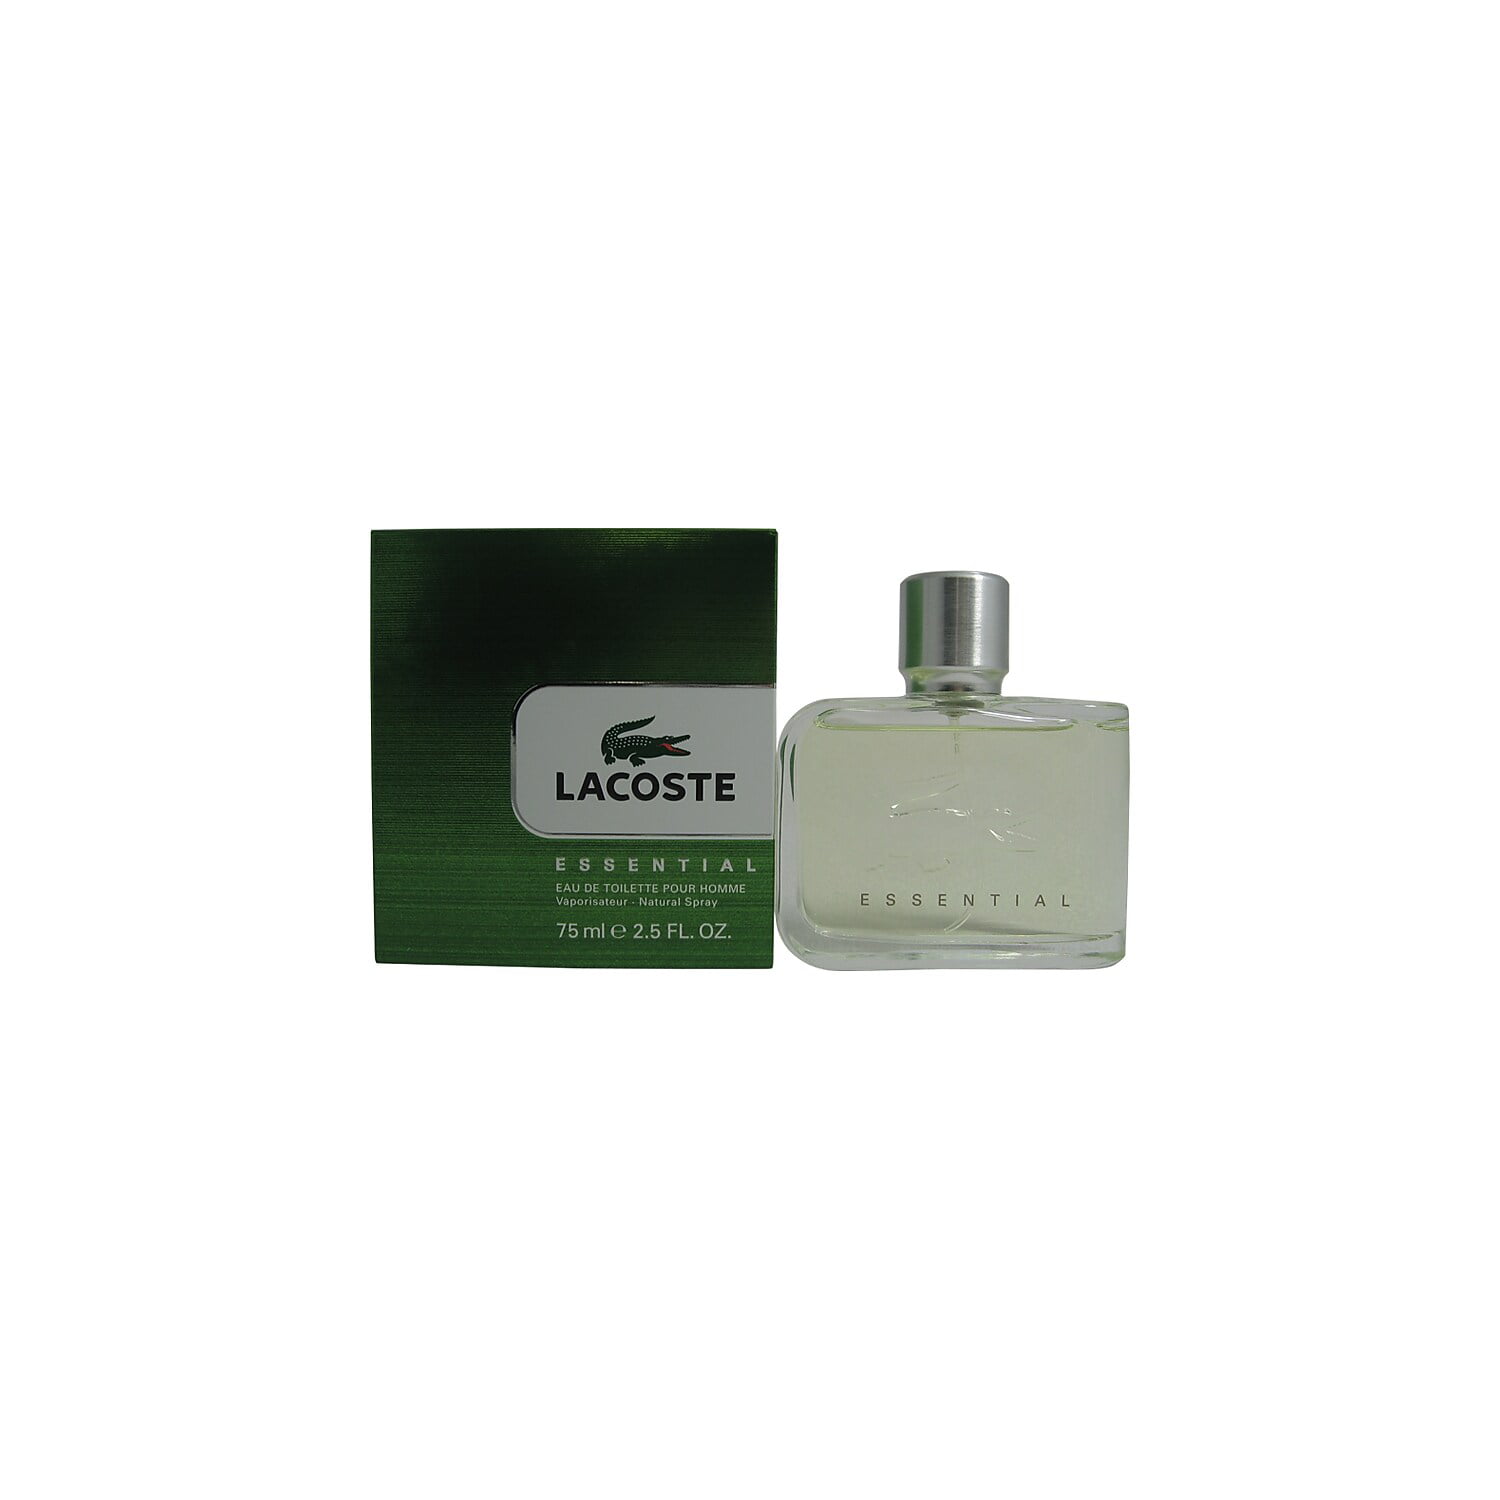 LACOSTE ESSENTIAL GREEN BOX LACOSTE By LACOSTE For MEN - Walmart.com